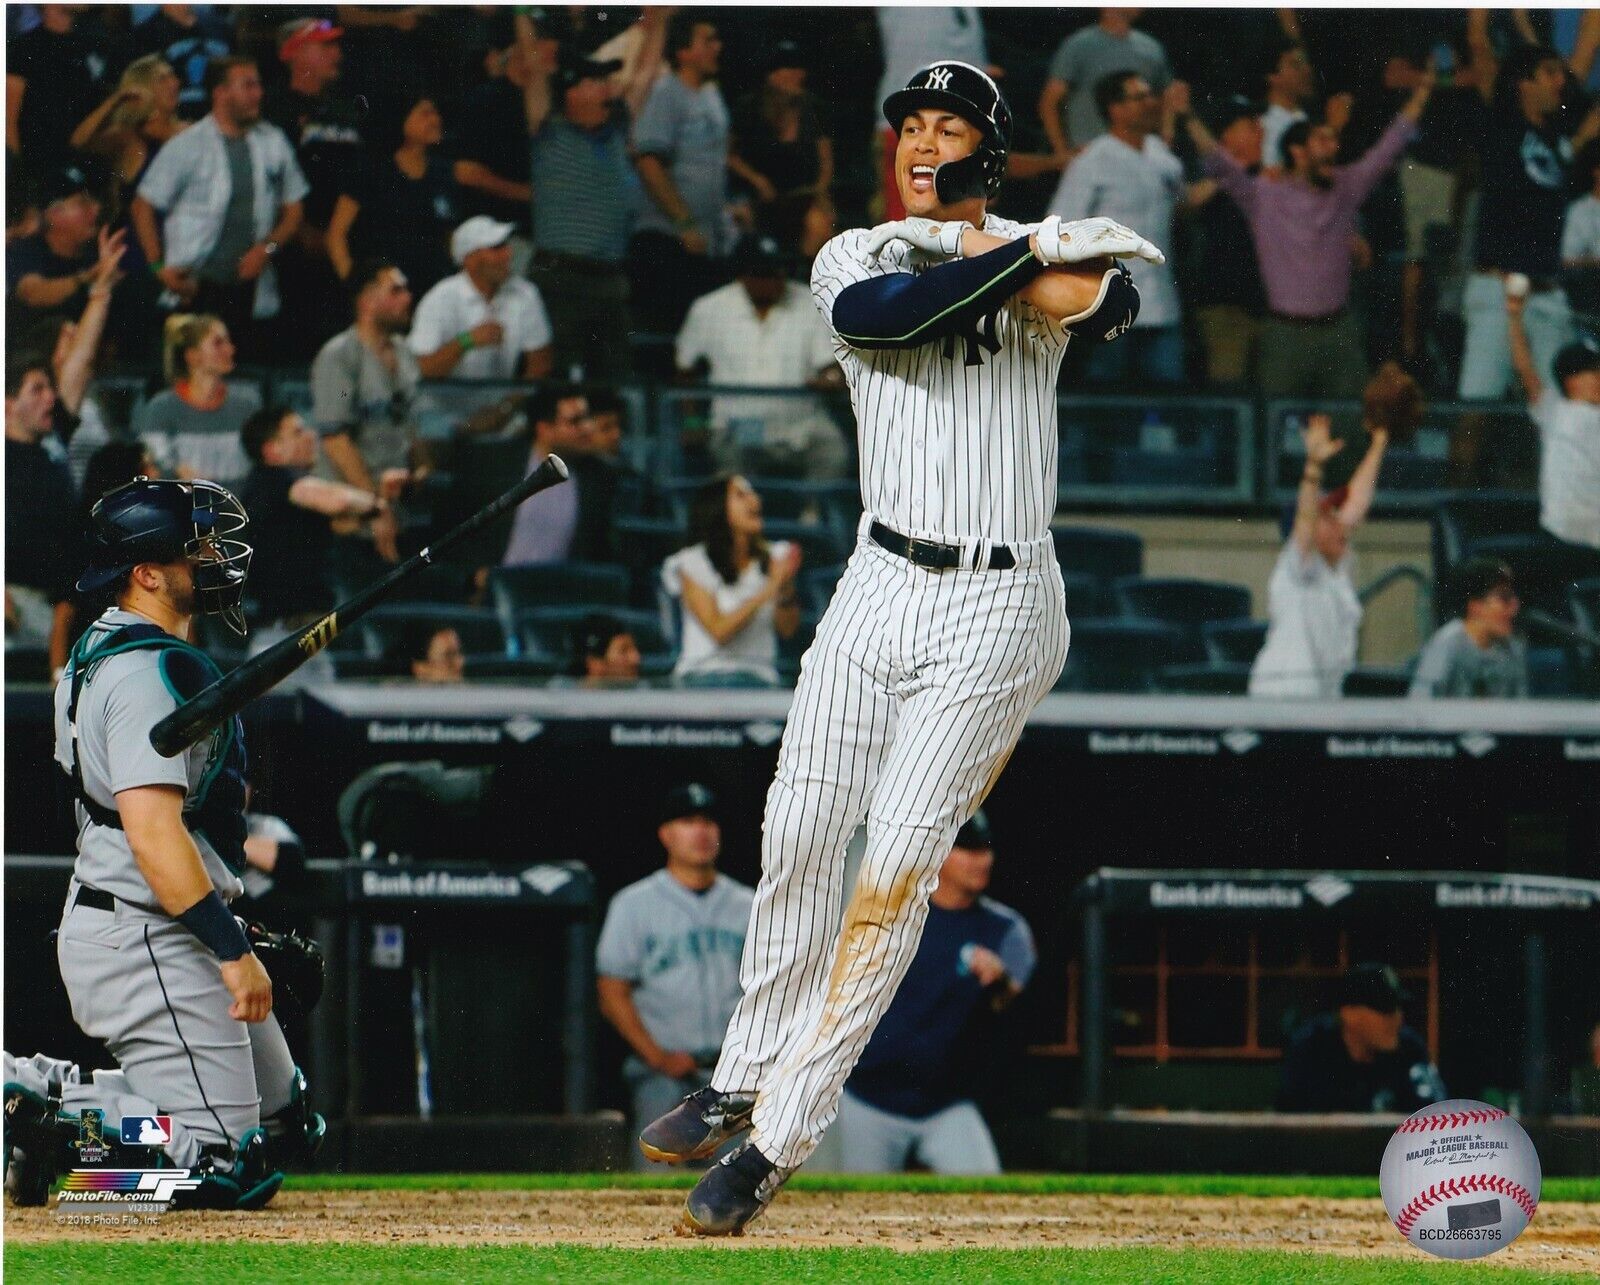 GIANCARLO STANTON NEW YORK YANKEES Photo Poster paintingFILE LICENSED ACTION 8x10 Photo Poster painting